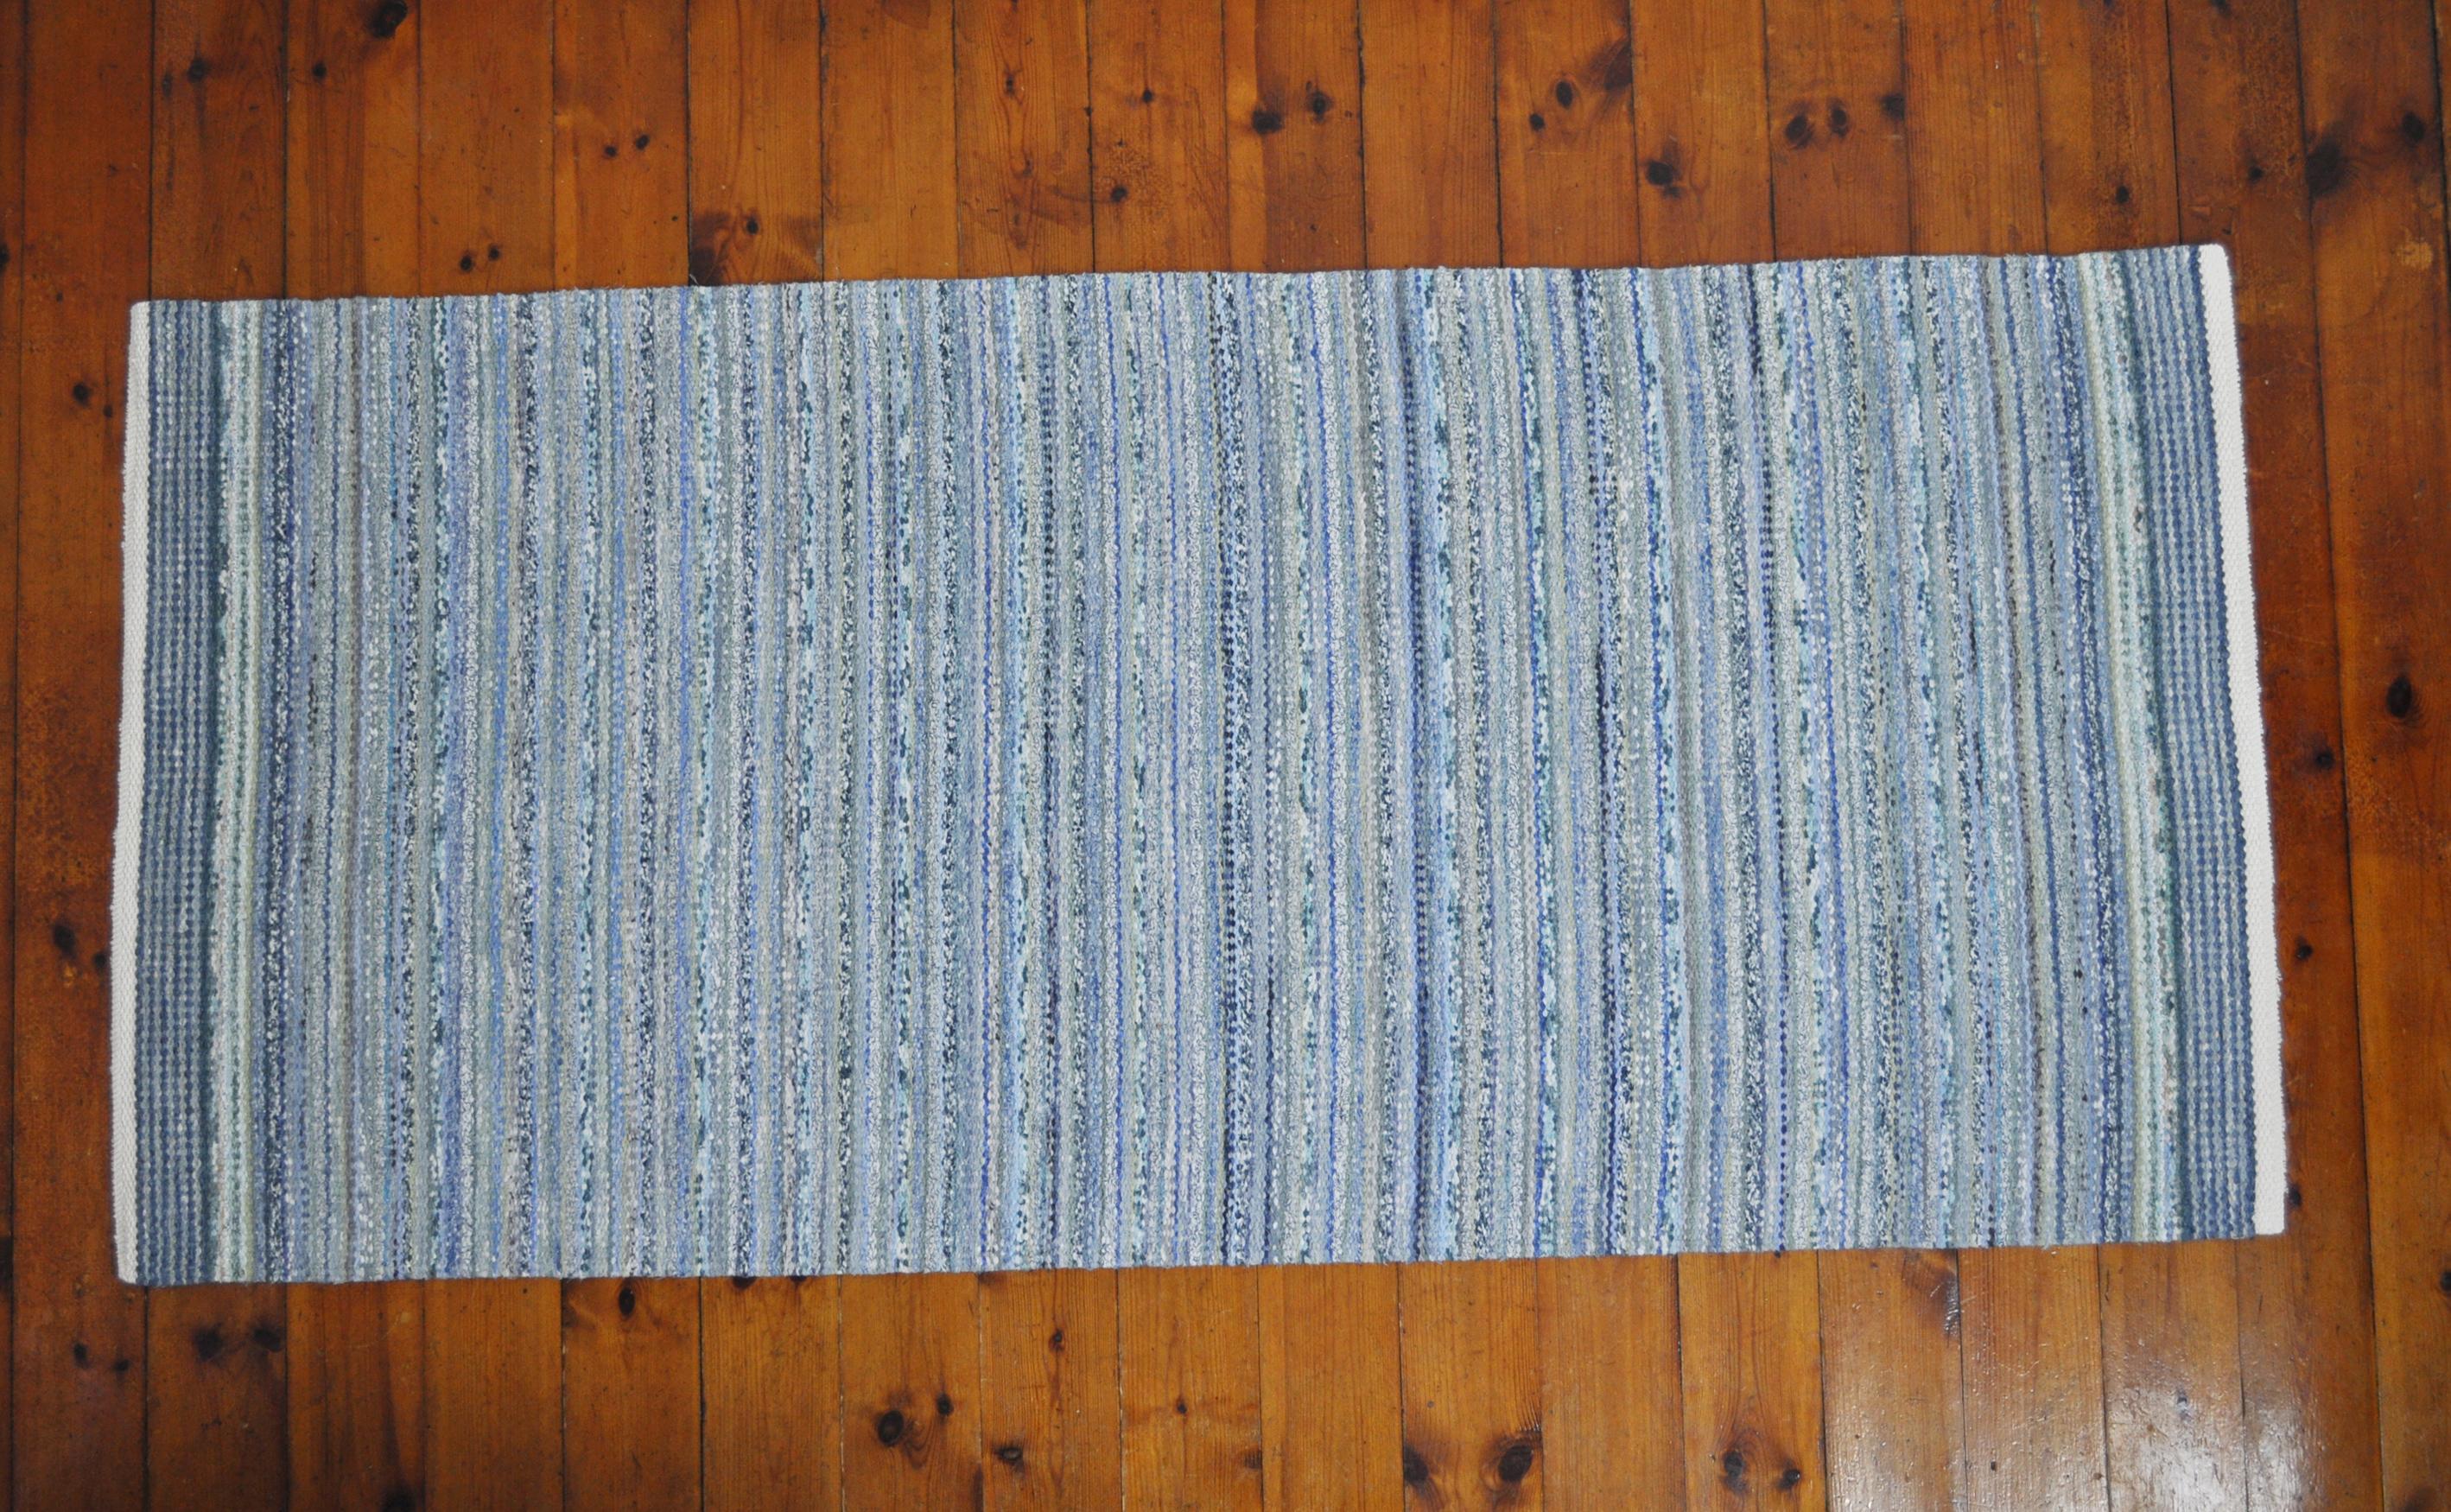 Unique Danish rug in recycled colored materials. Handwoven in the traditions of Scandinavian rugs. High quality craftsmanship by MB handwoven rugs. Can be washed without loosing color or shape.